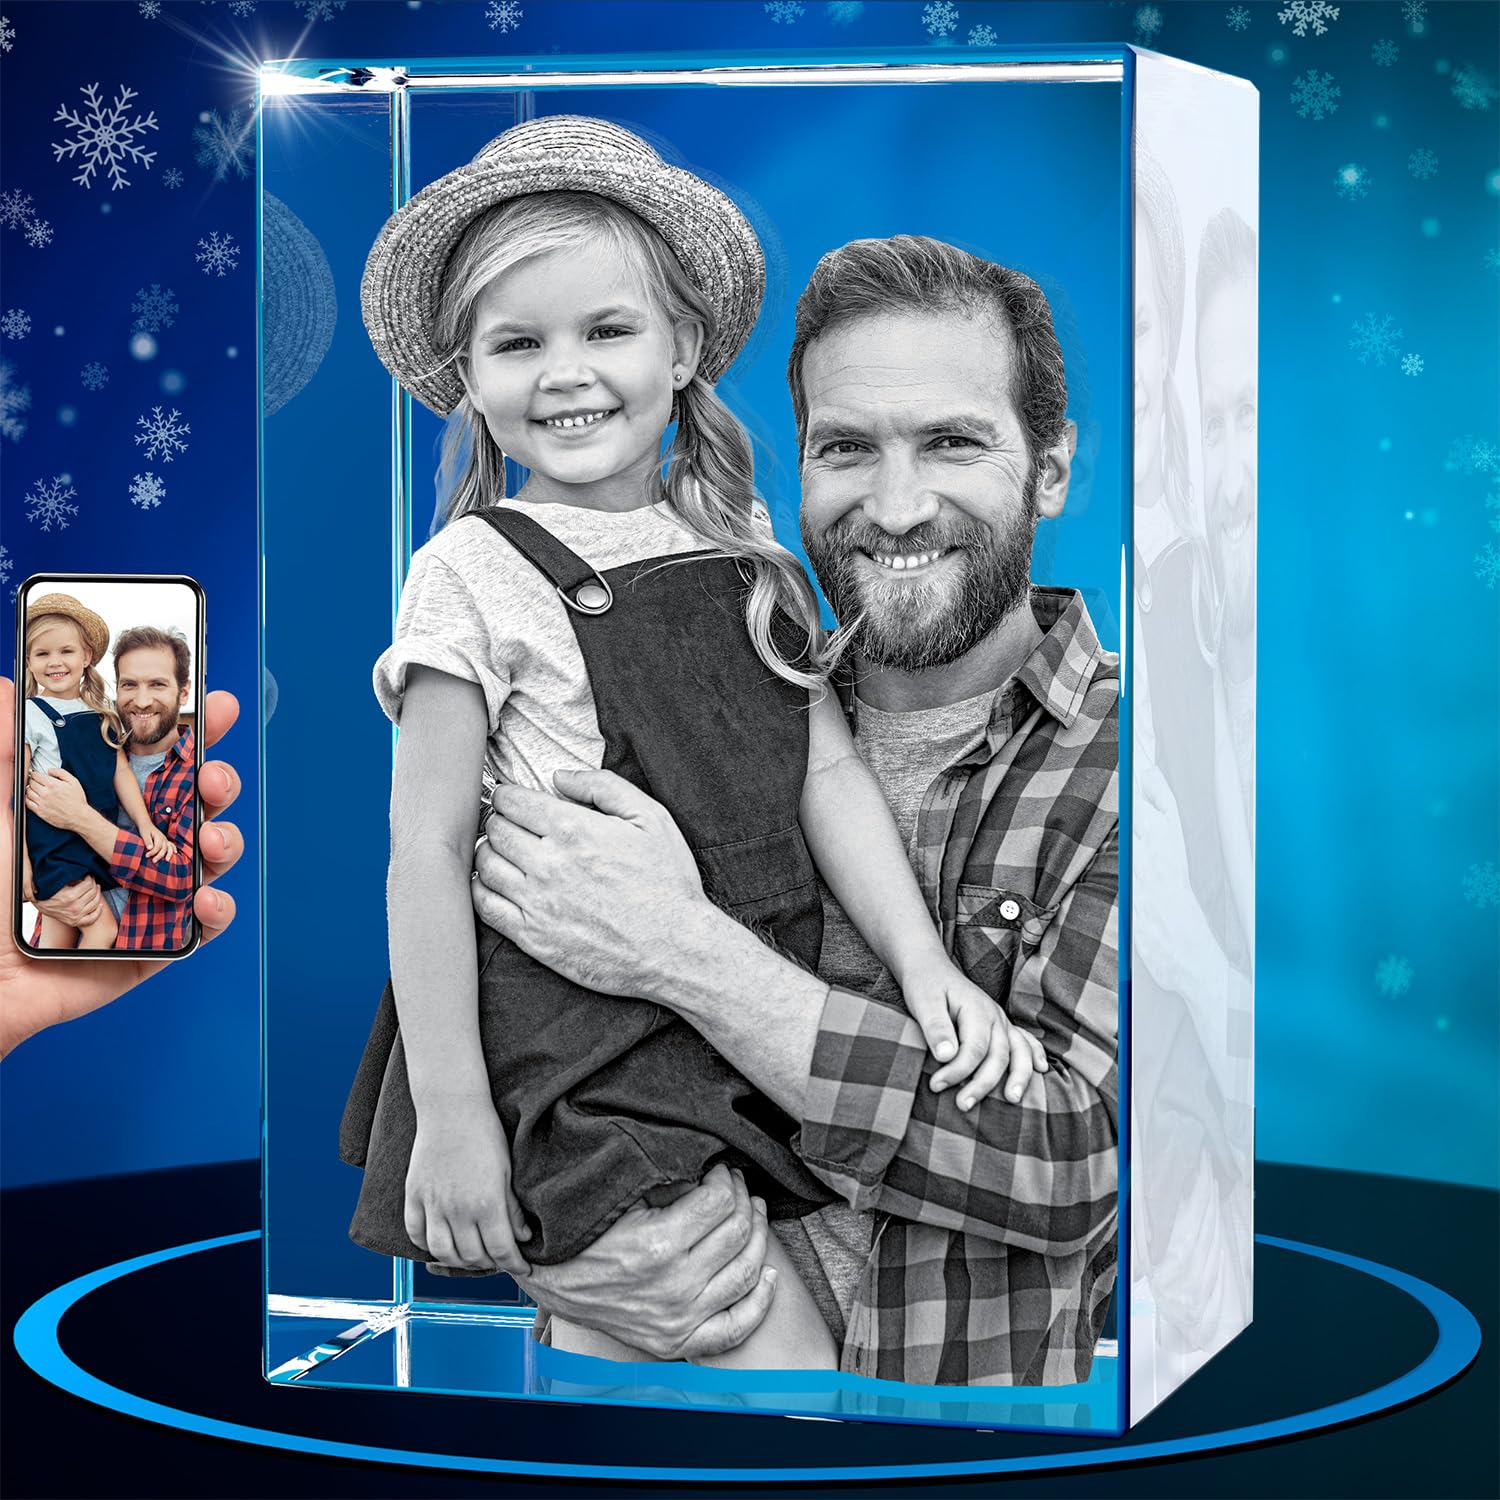 ArtPix 3D Crystal Photo, Christmas Gifts for Mom, Dad, Men, Women, Xmas Gifts, Great Personalized Gifts With Your Own Photo, 3D 